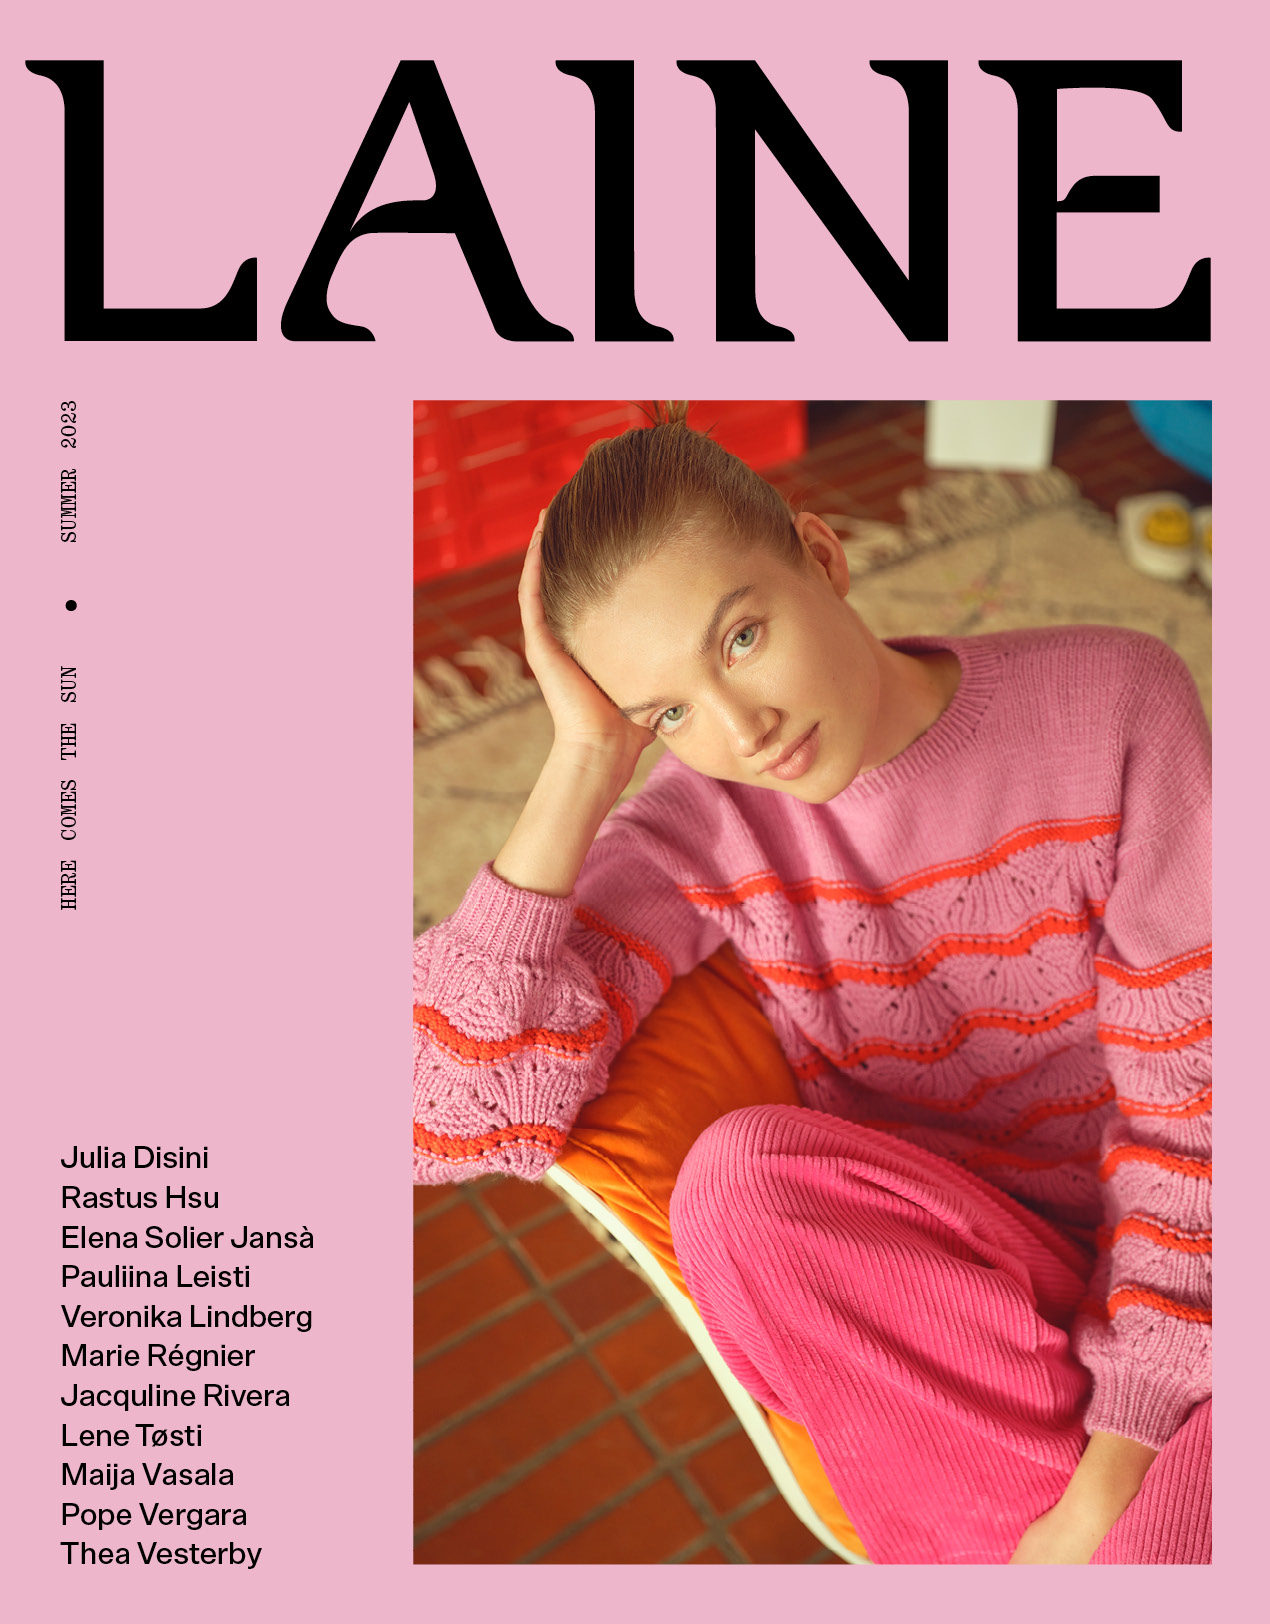 Laine Magazine 17 cover depicting a model wearing a pink and red sweater